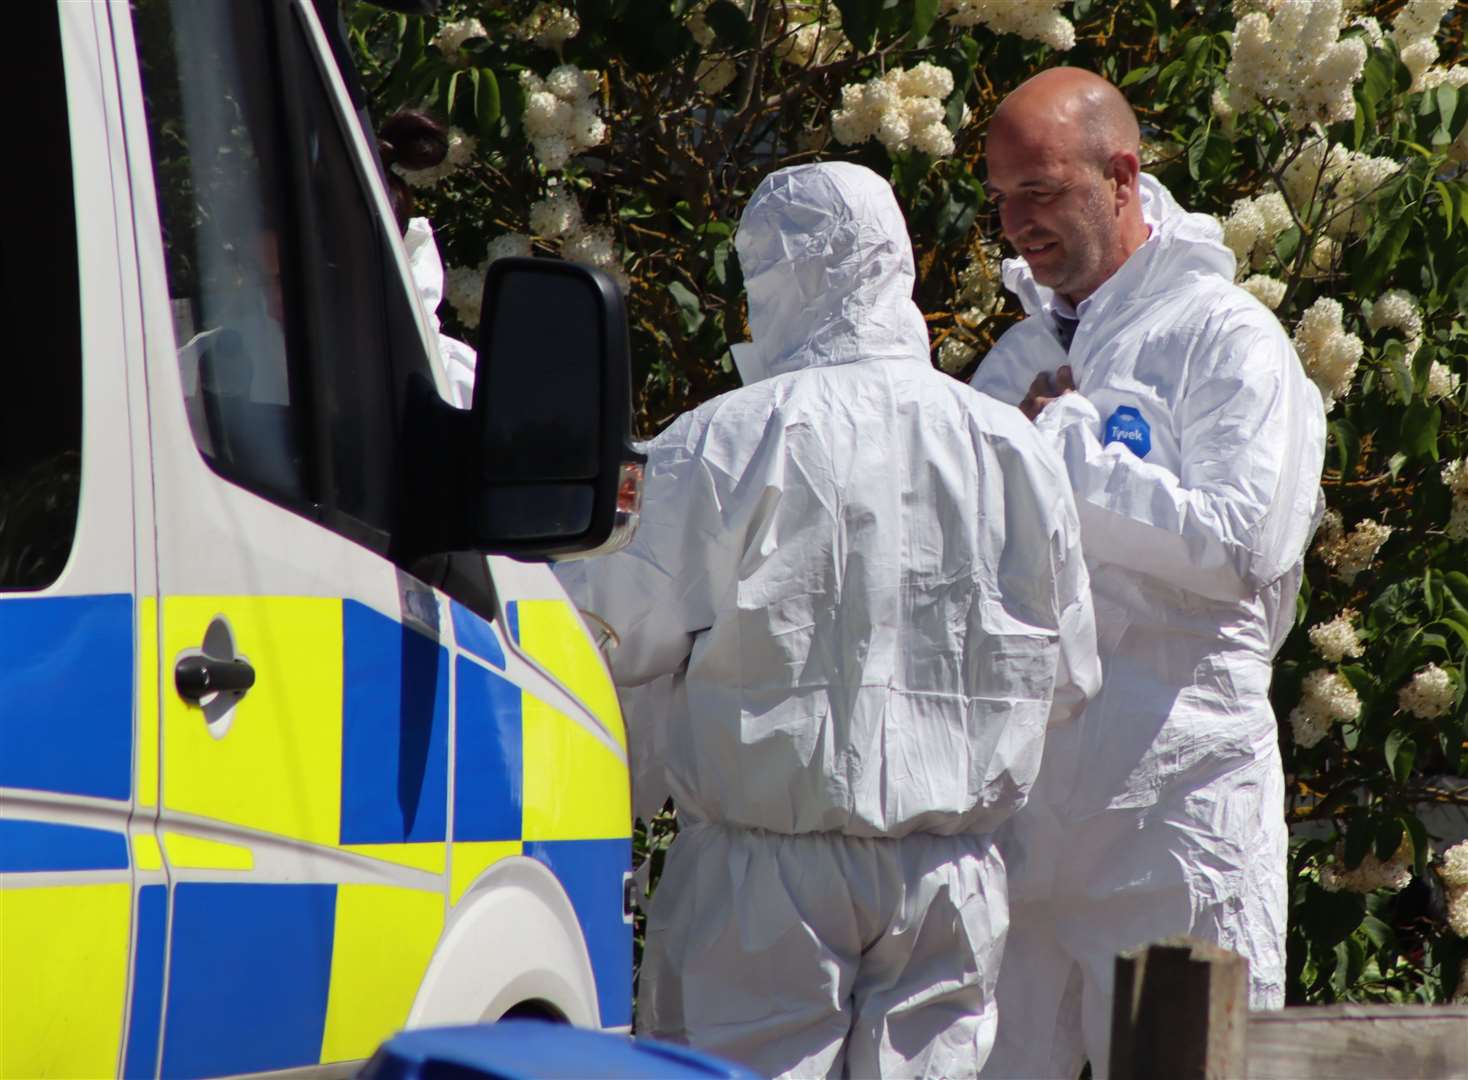 Police forensics officers have been investigating a property on the Isle of Sheppey since Saturday